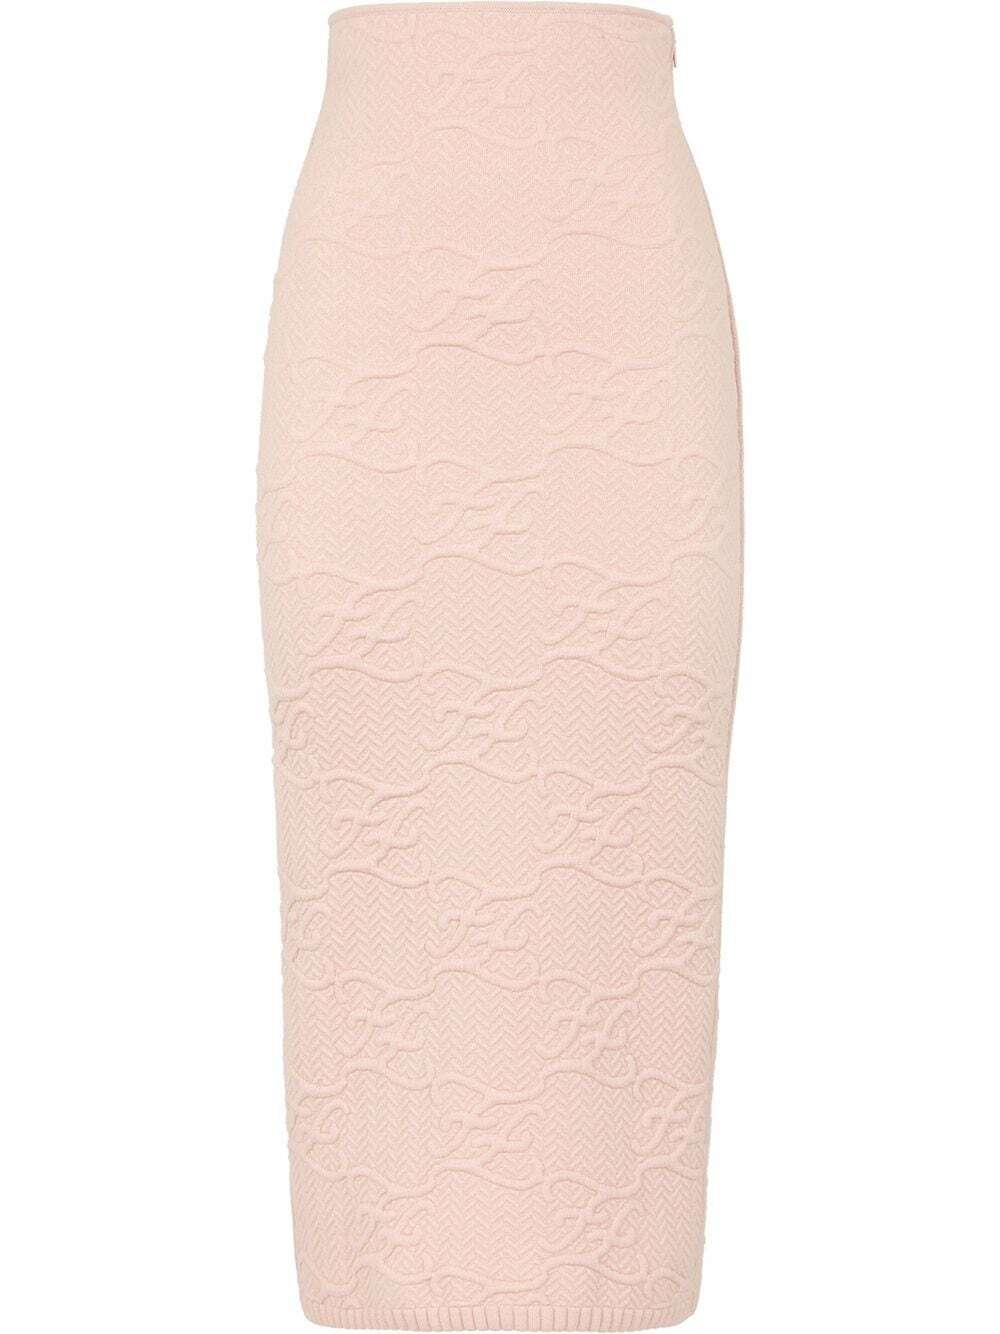 FF Karligraphy Pencil Skirt in Pink